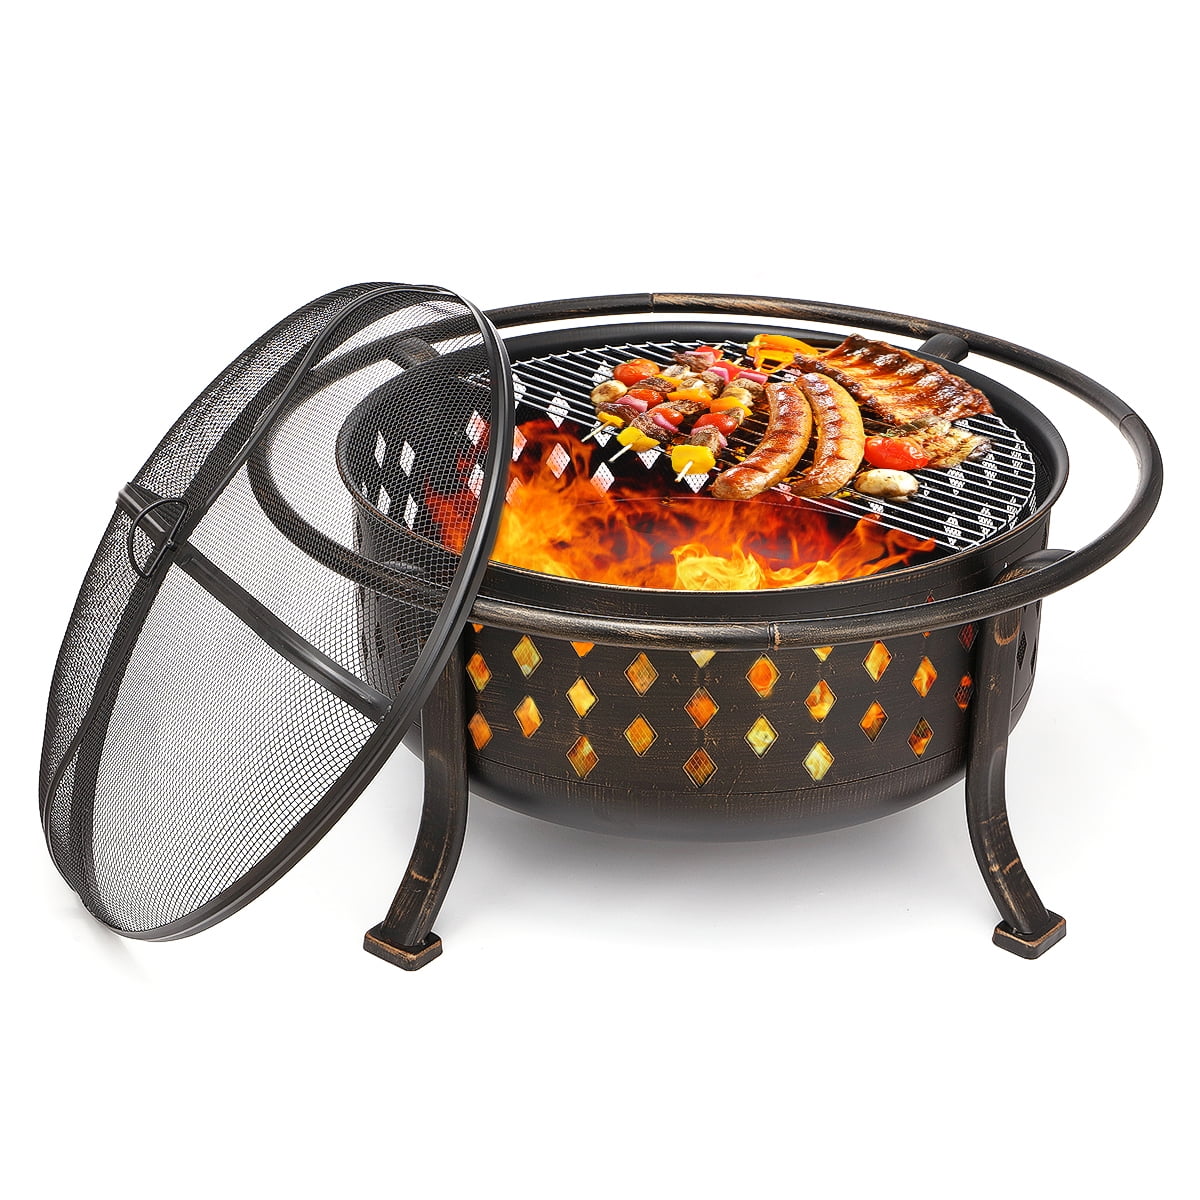 Portable Fire Pit Ring 37" Steel Metal Round Burner Efficient Heat Output 